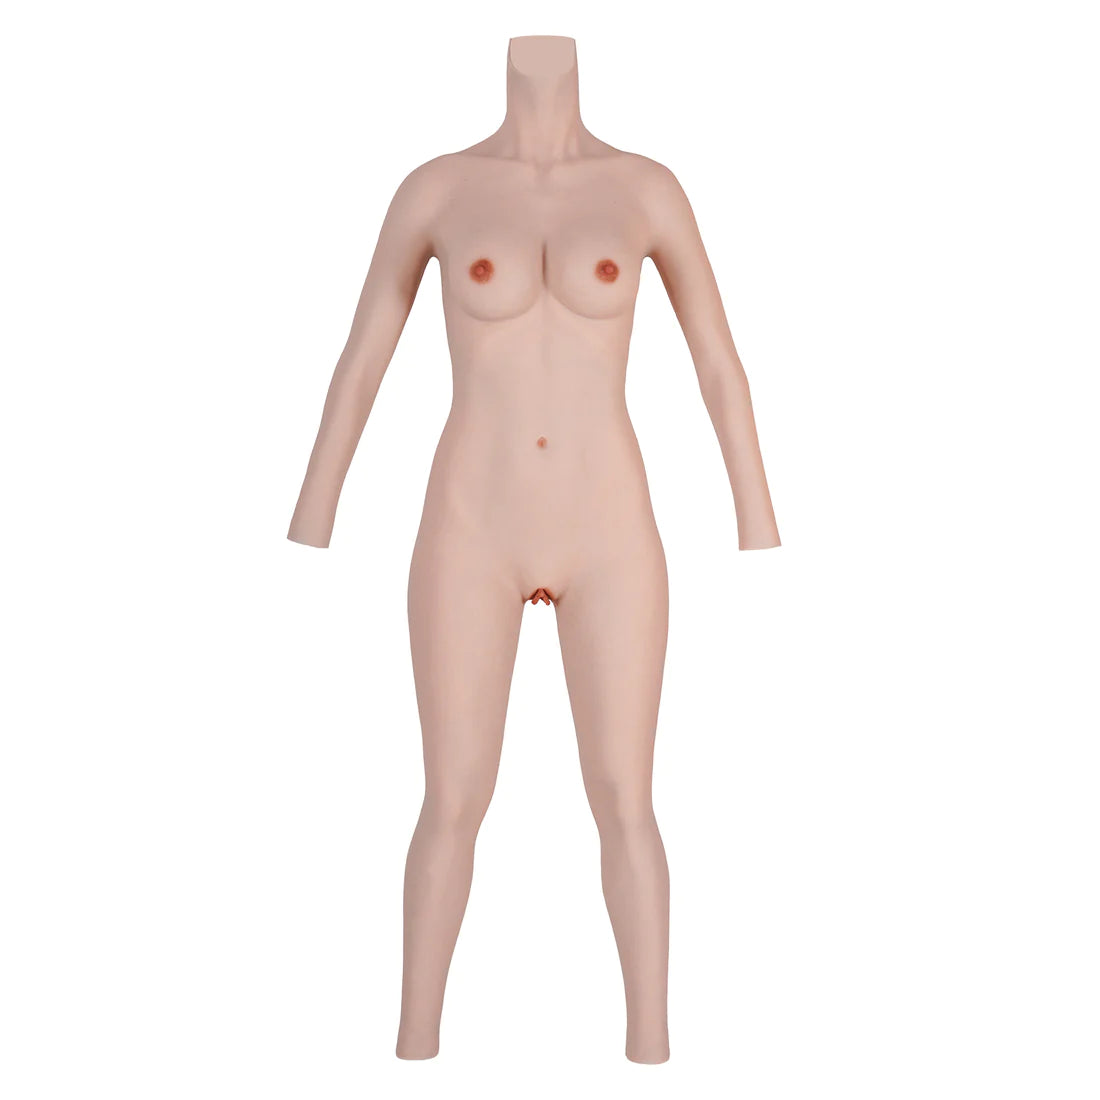 CYOMI Silicone Bodysuit Fake Vagina Breast Forms 3-Point D Cup